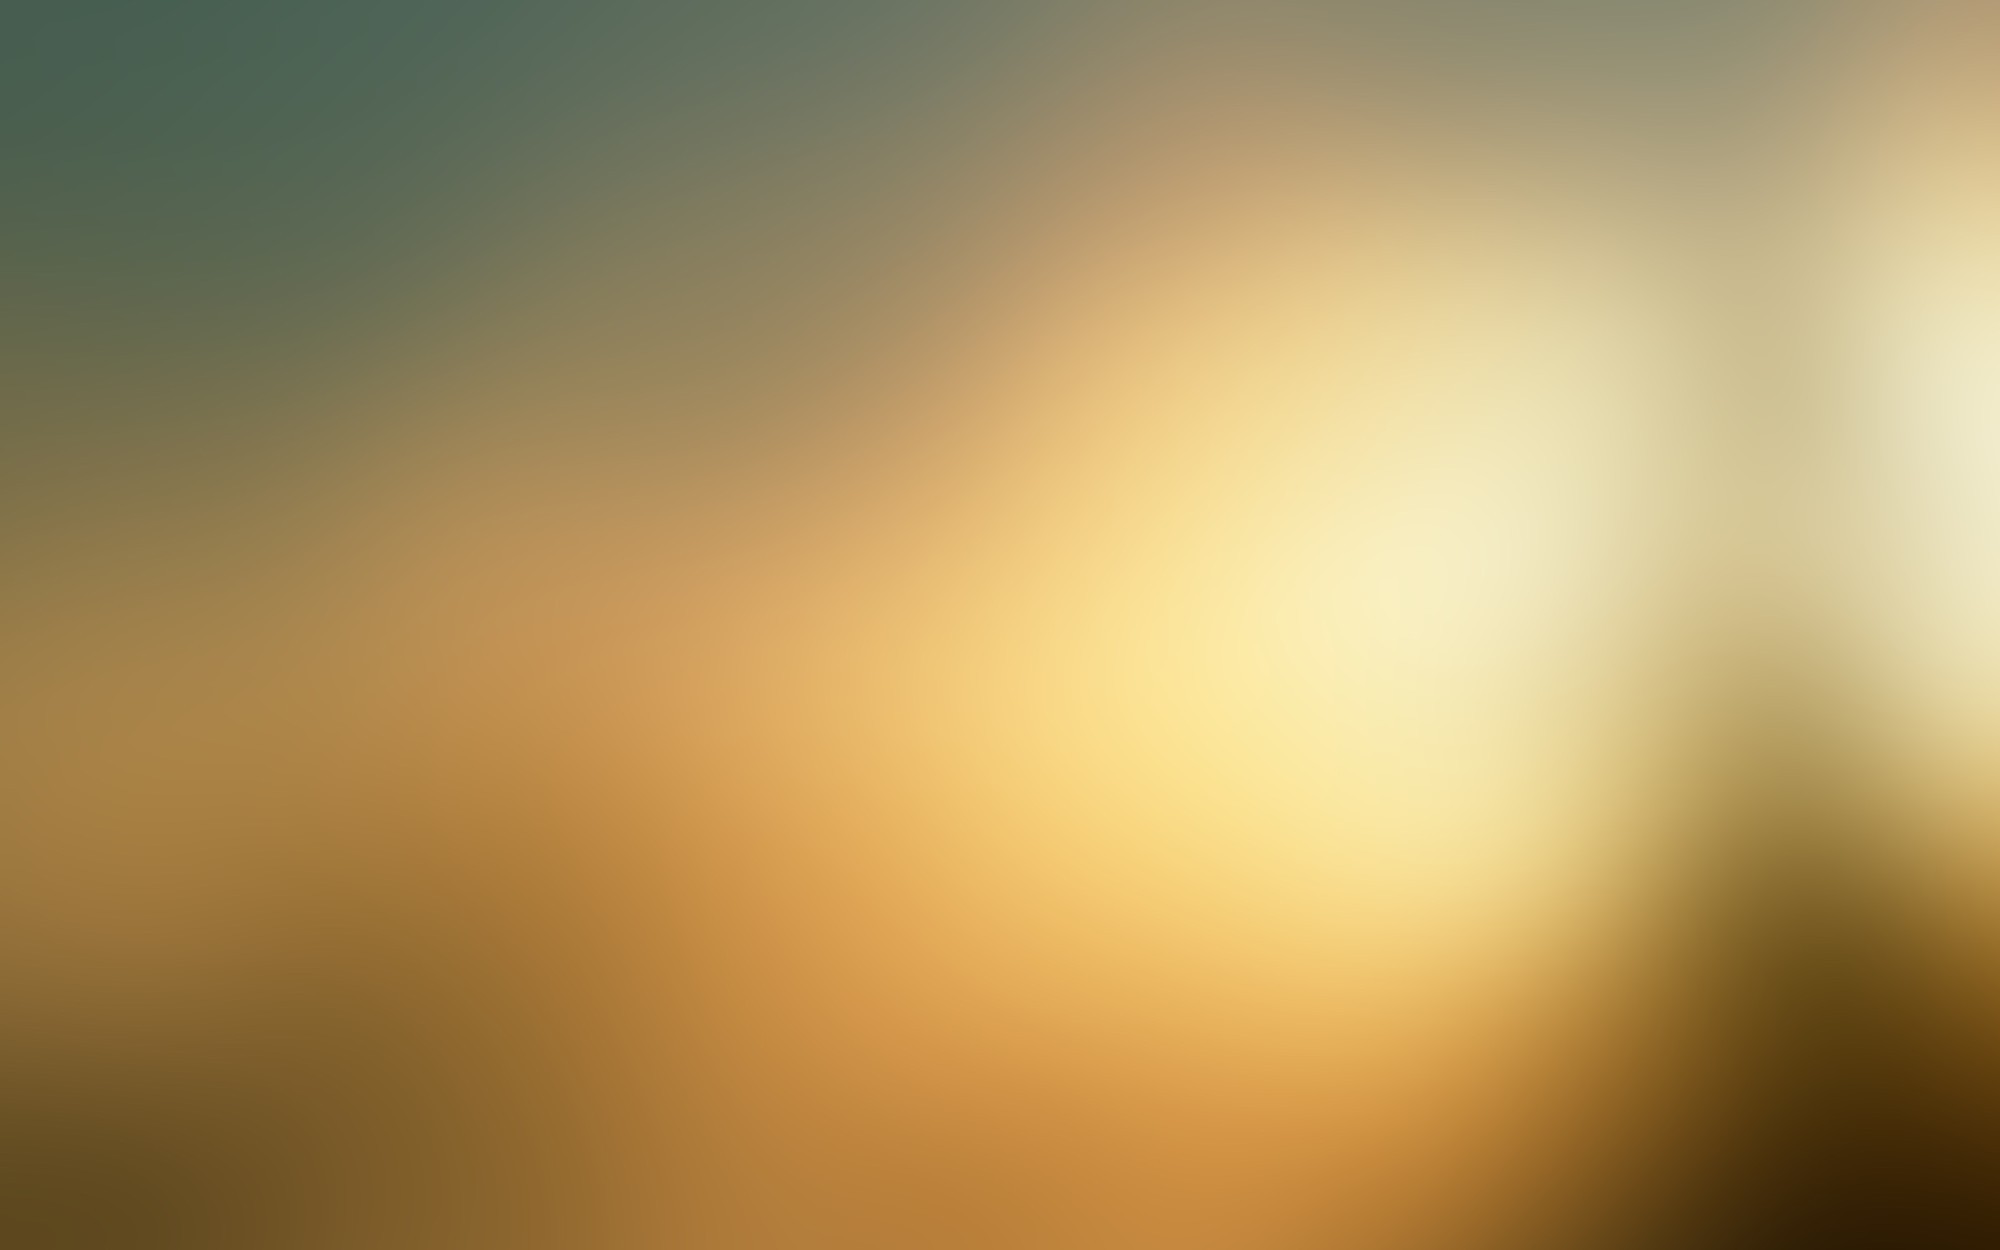 Blur background ·① Download free stunning full HD wallpapers for